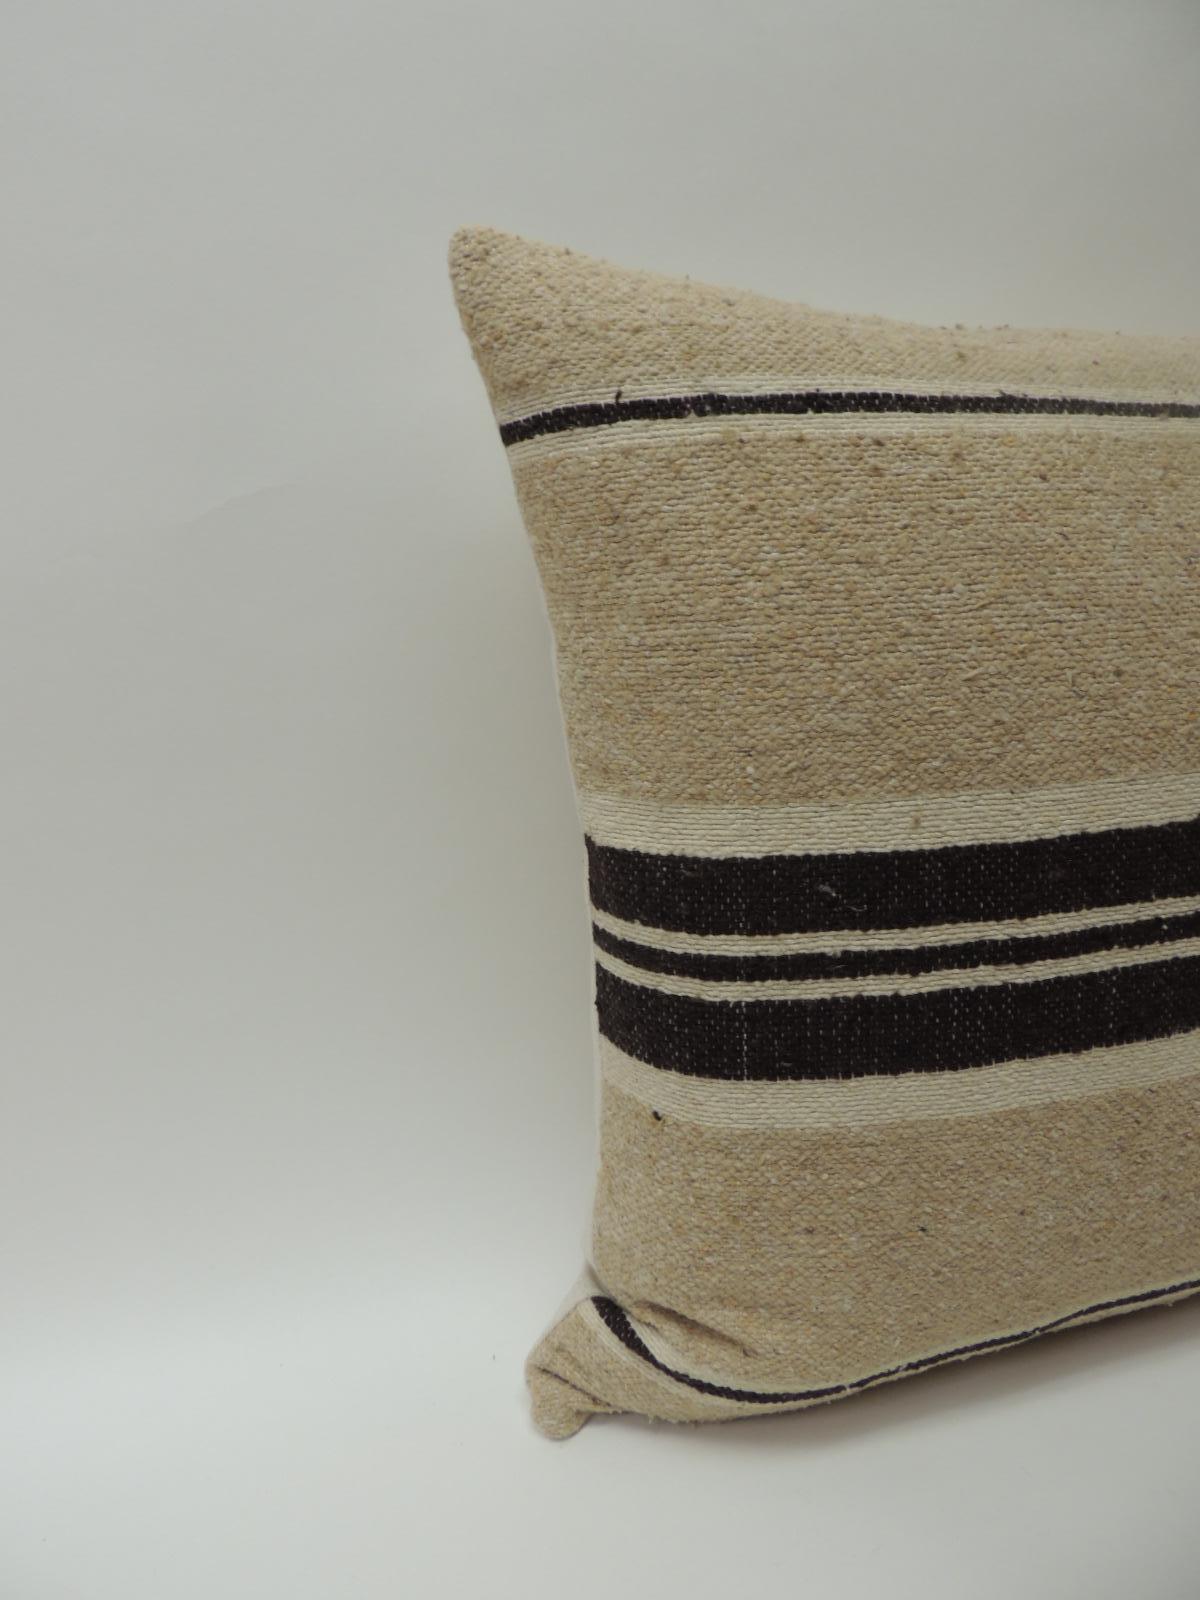 Vintage African woven tribal artisanal textile decorative pillow.
Tunisian vintage artisanal tribal textile decorative pillows handcrafted from the vintage wool and hemp hand-loomed by the Berber tribes from the Atlas Mountains of Morocco. Natural